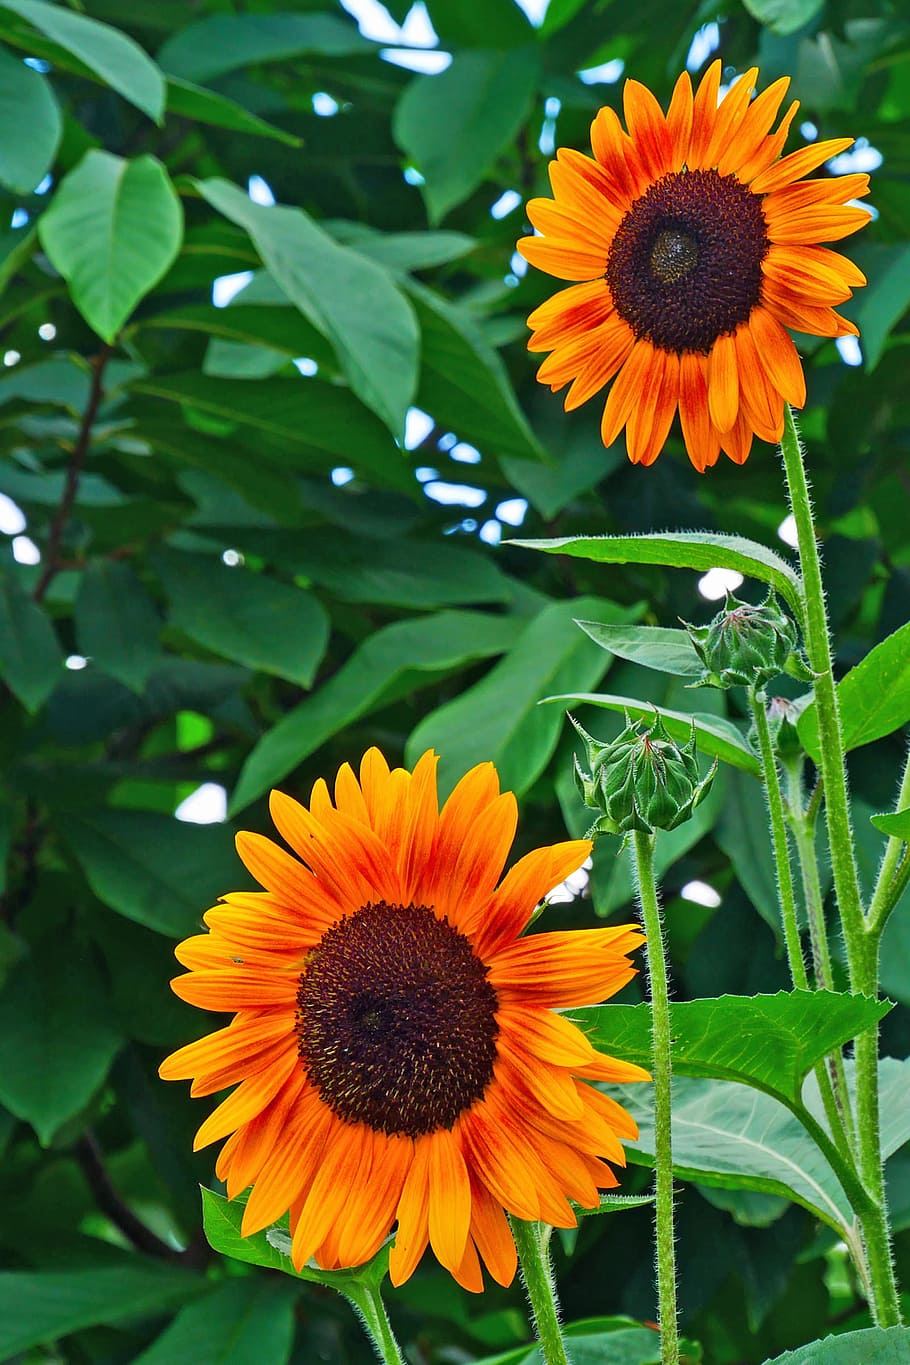 pictures, sunflowers, -, plant, attracts, bees., helianthus, common sunflower, native flowers, native annuals